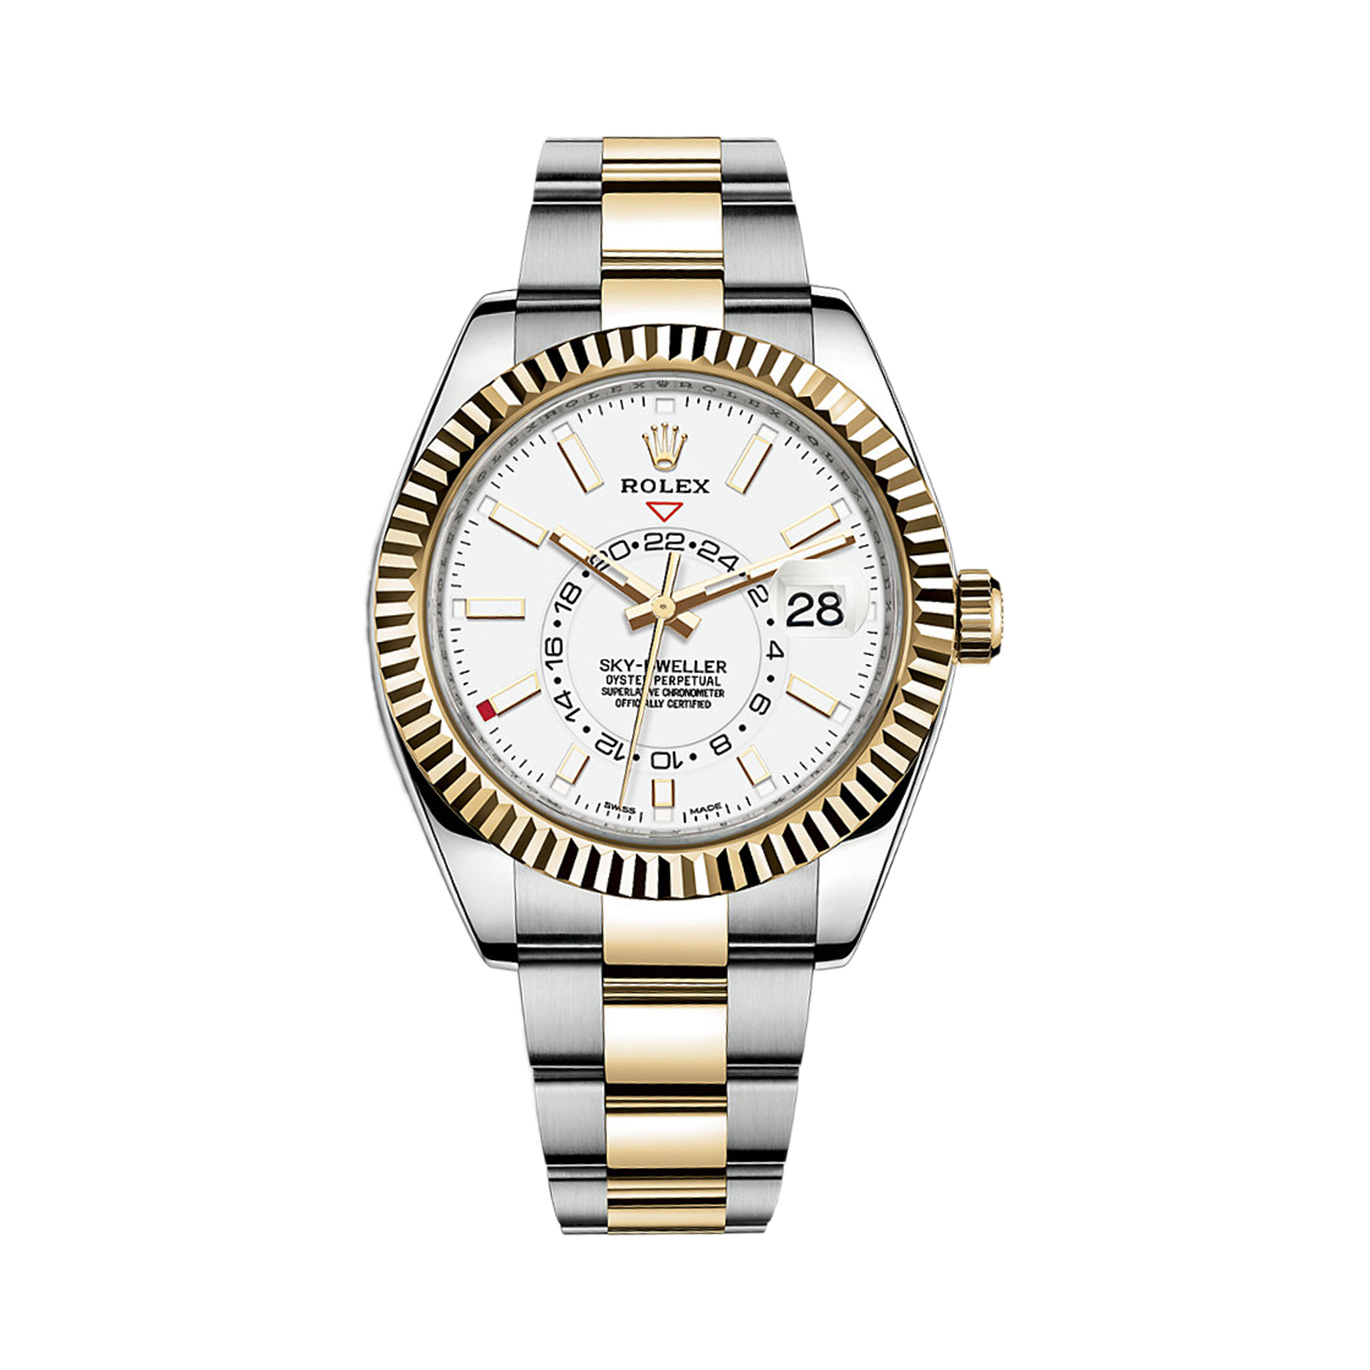 Sky-Dweller 326933 Yellow Gold & Stainless Steel Watch (White)